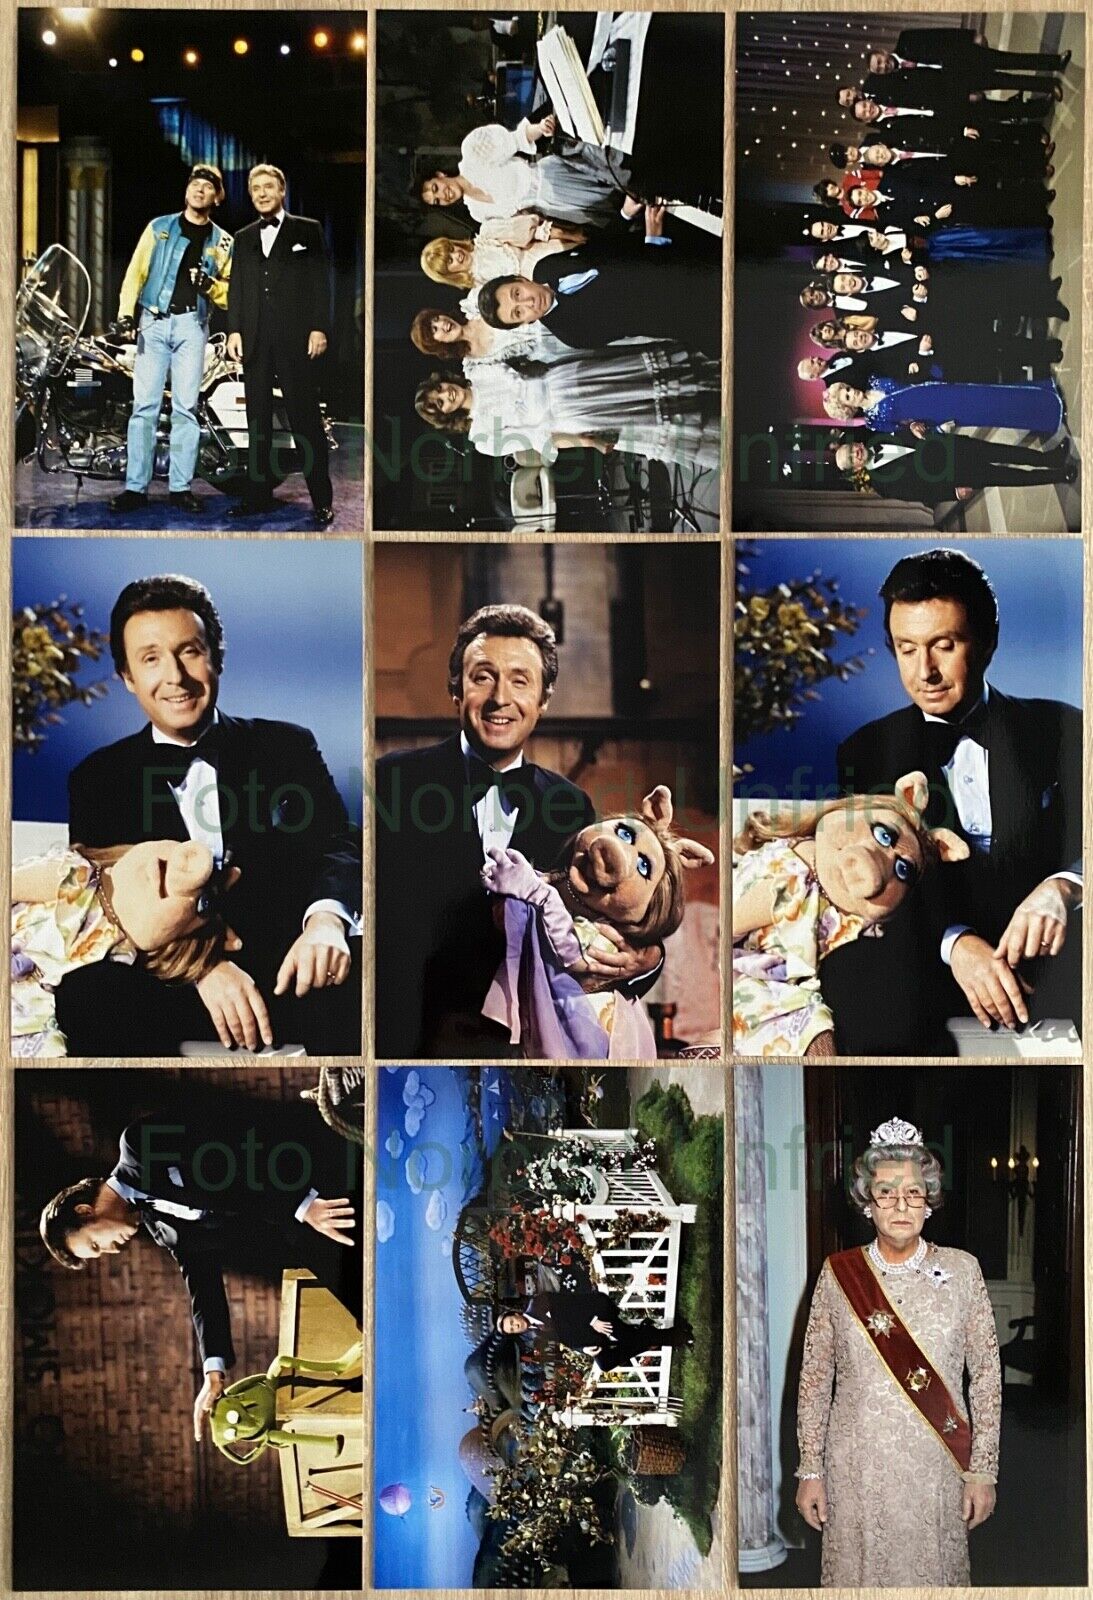 9 X Peter Alexander Photo Poster painting 20 X 30 CM A4 Poster Format Without Autograph (